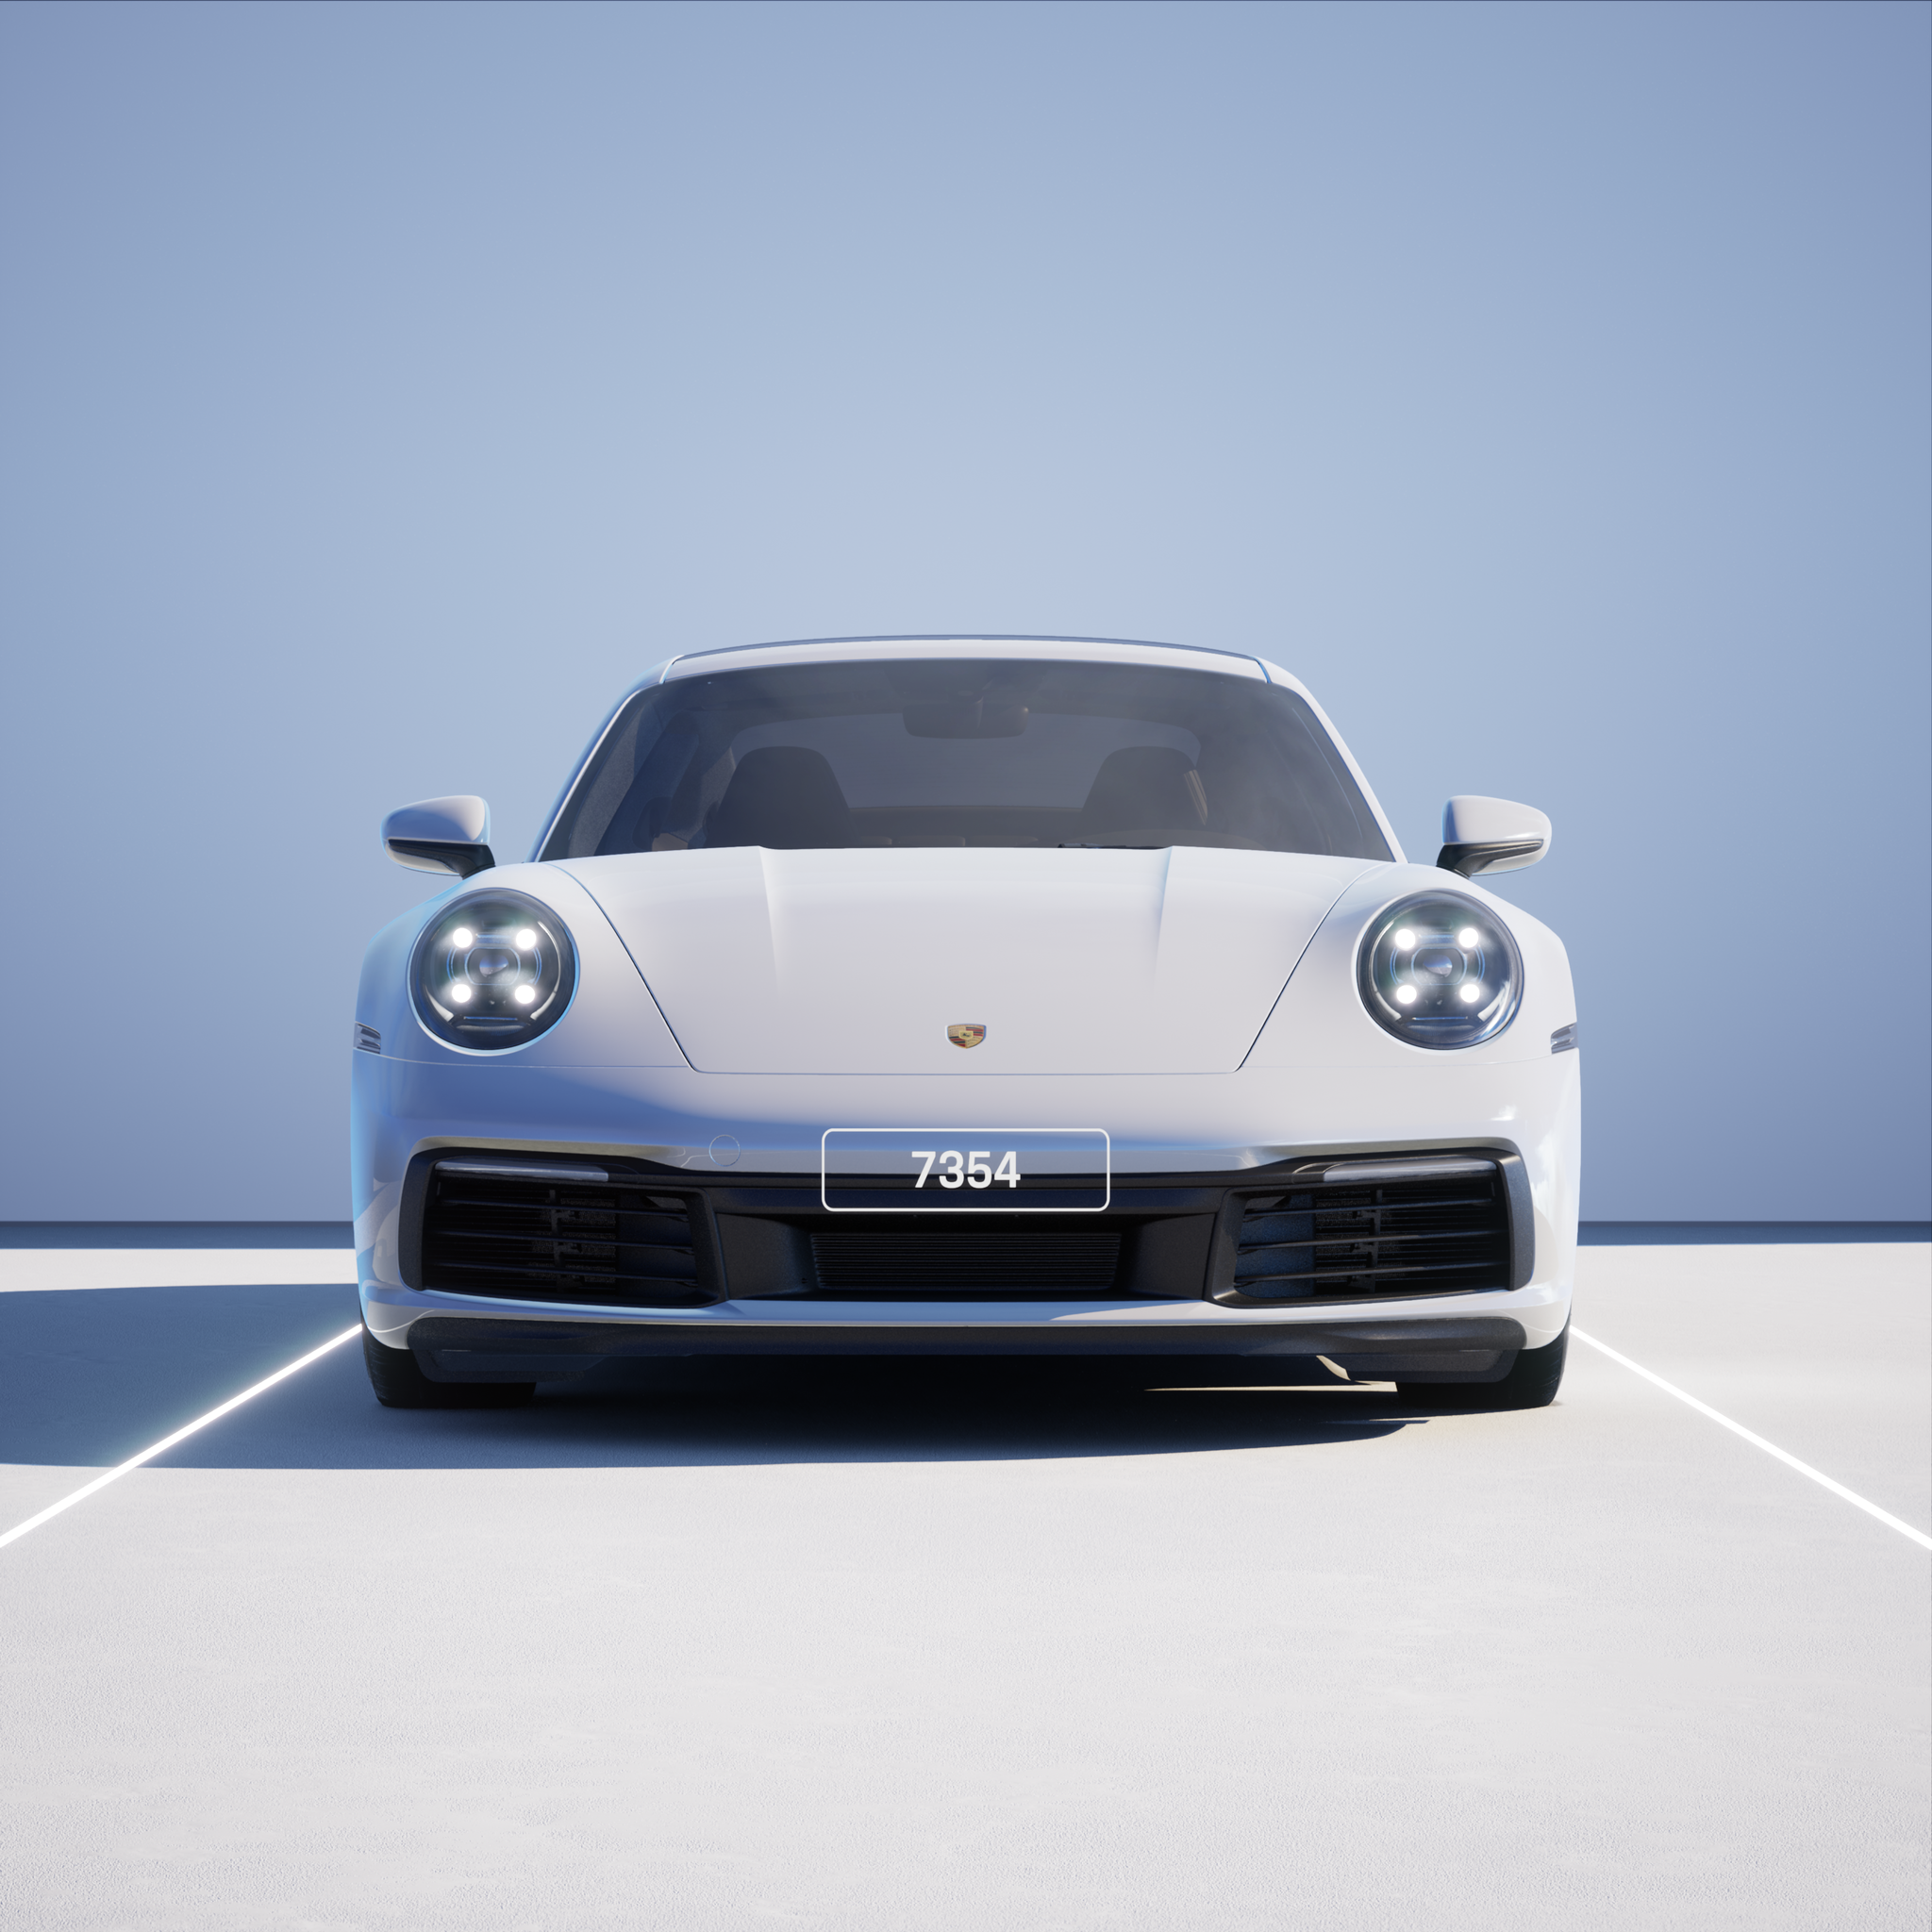 The PORSCHΞ 911 7354 image in phase